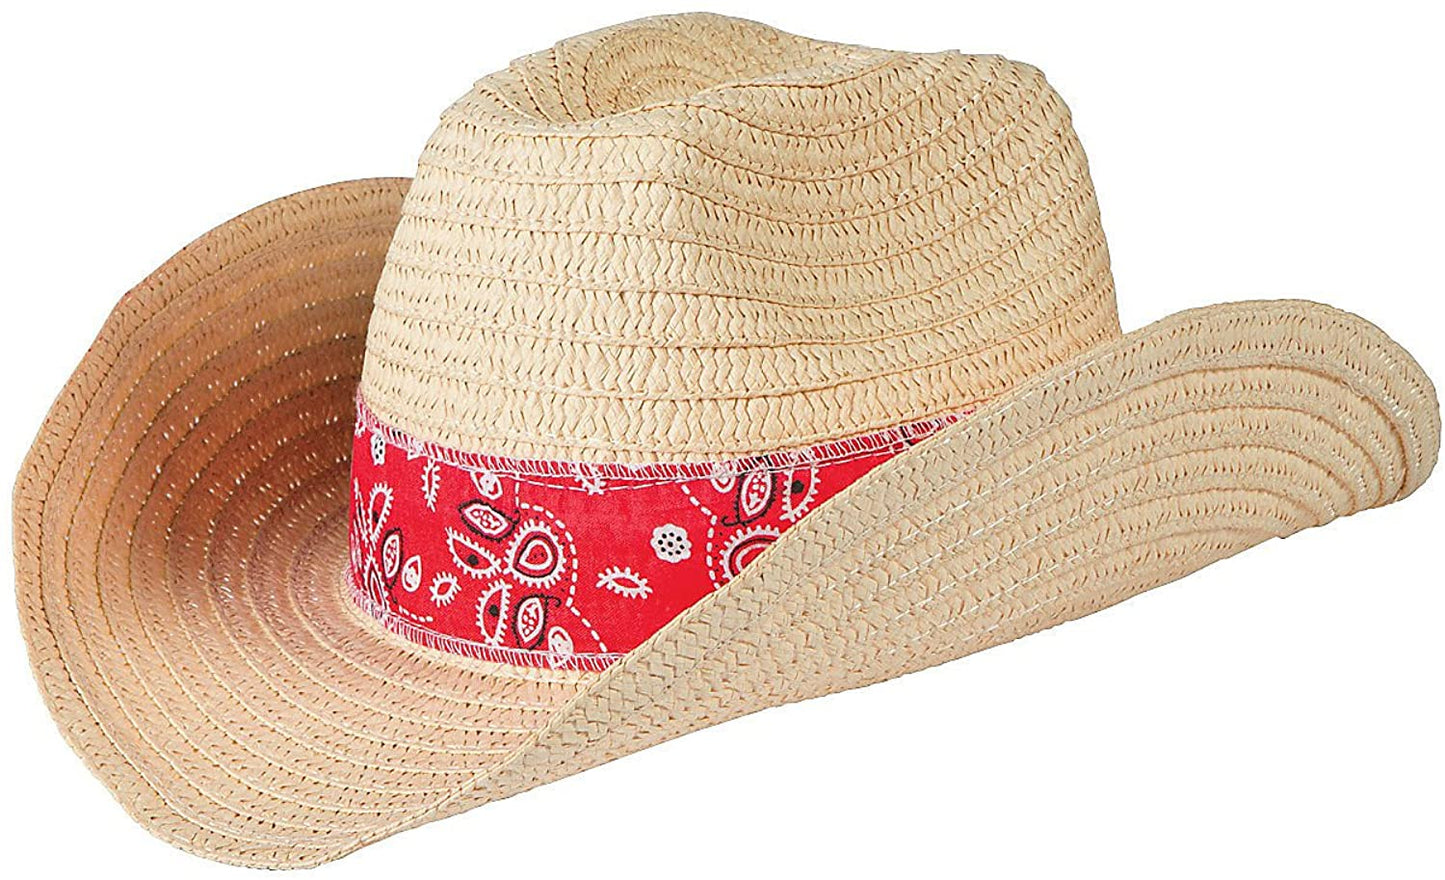 Cowboy Hat With Red Band